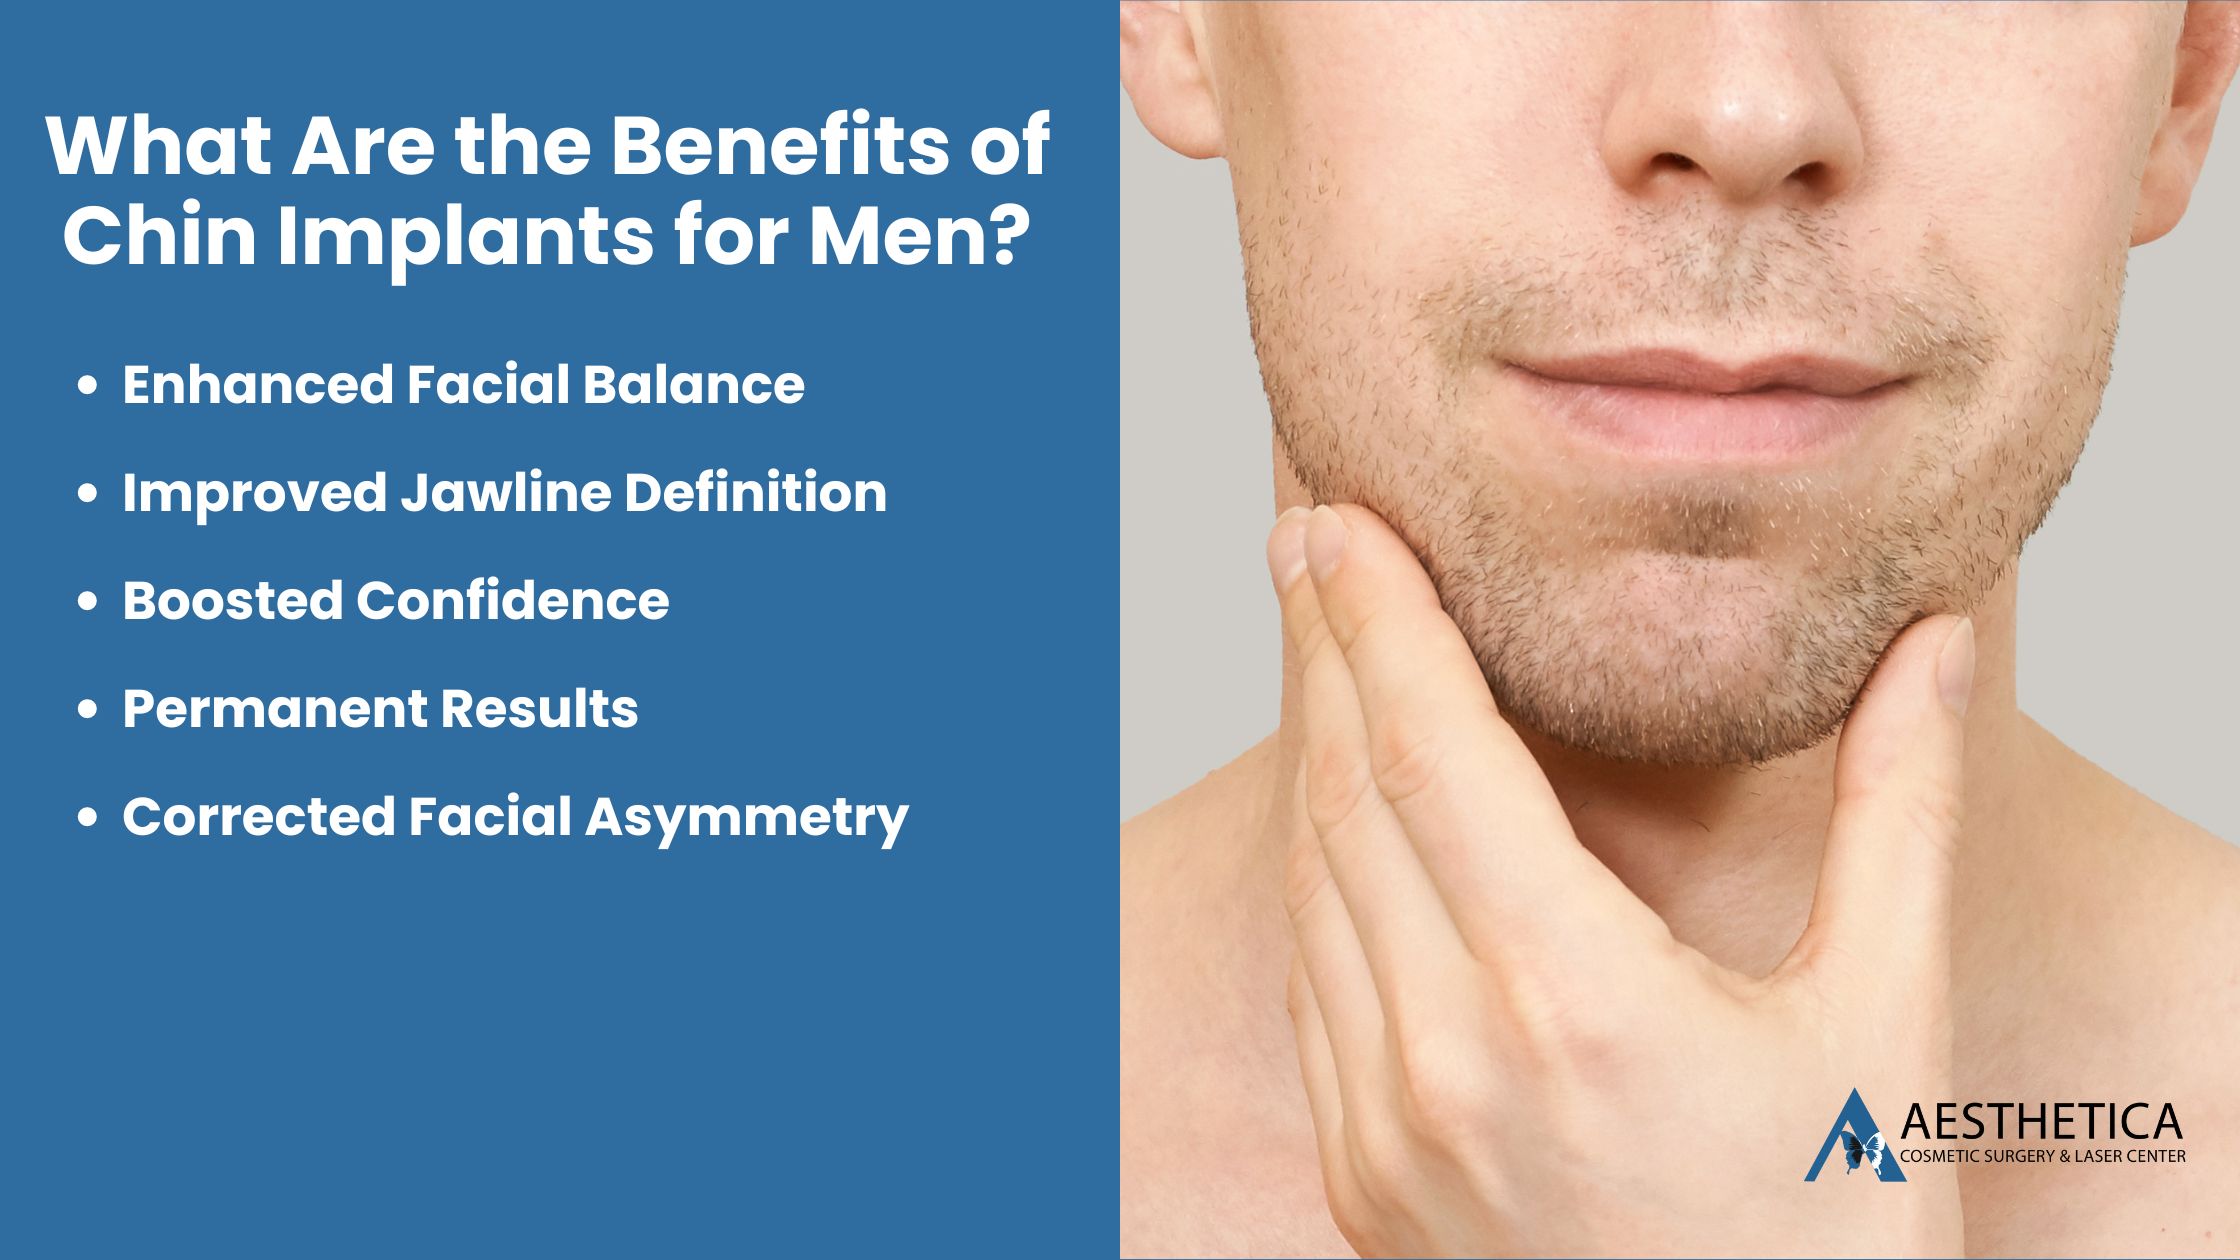 What Are the Benefits of Chin Implants for Men?